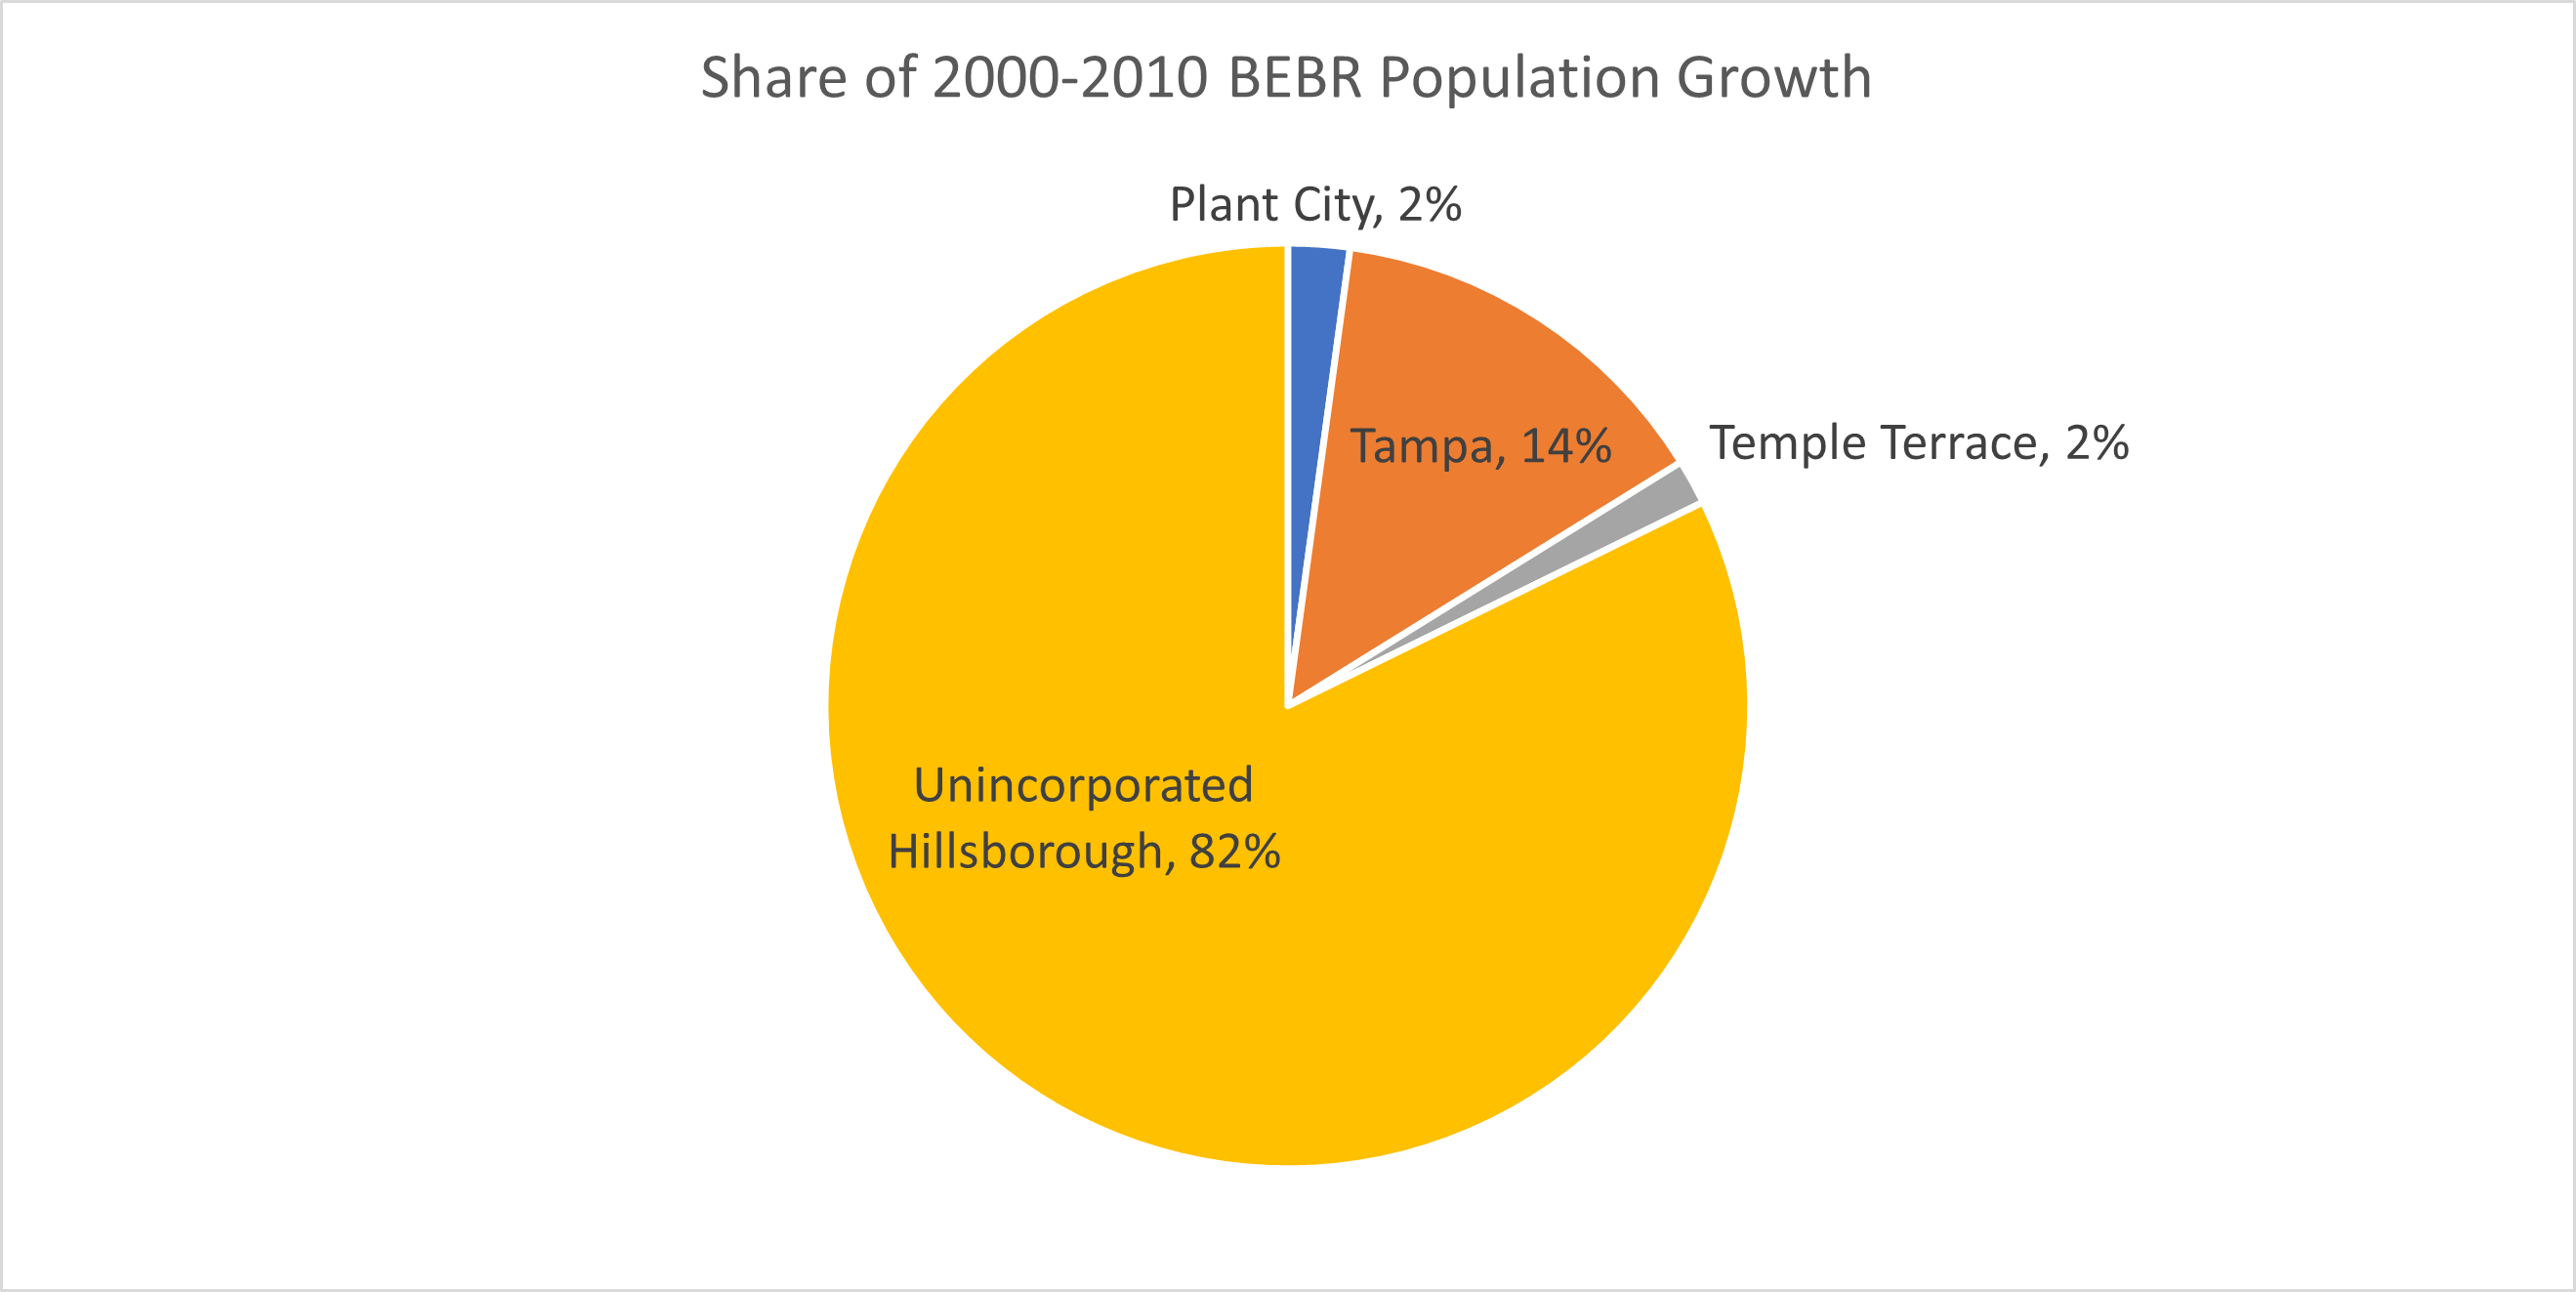 This pie chart shows share of 2000-2010 BEBR population growth by jurisdiction.  Unincorporated Hillsborough County captured 82% of the 2000-2010 population growth.  Meanwhile, Tampa captured 14%.